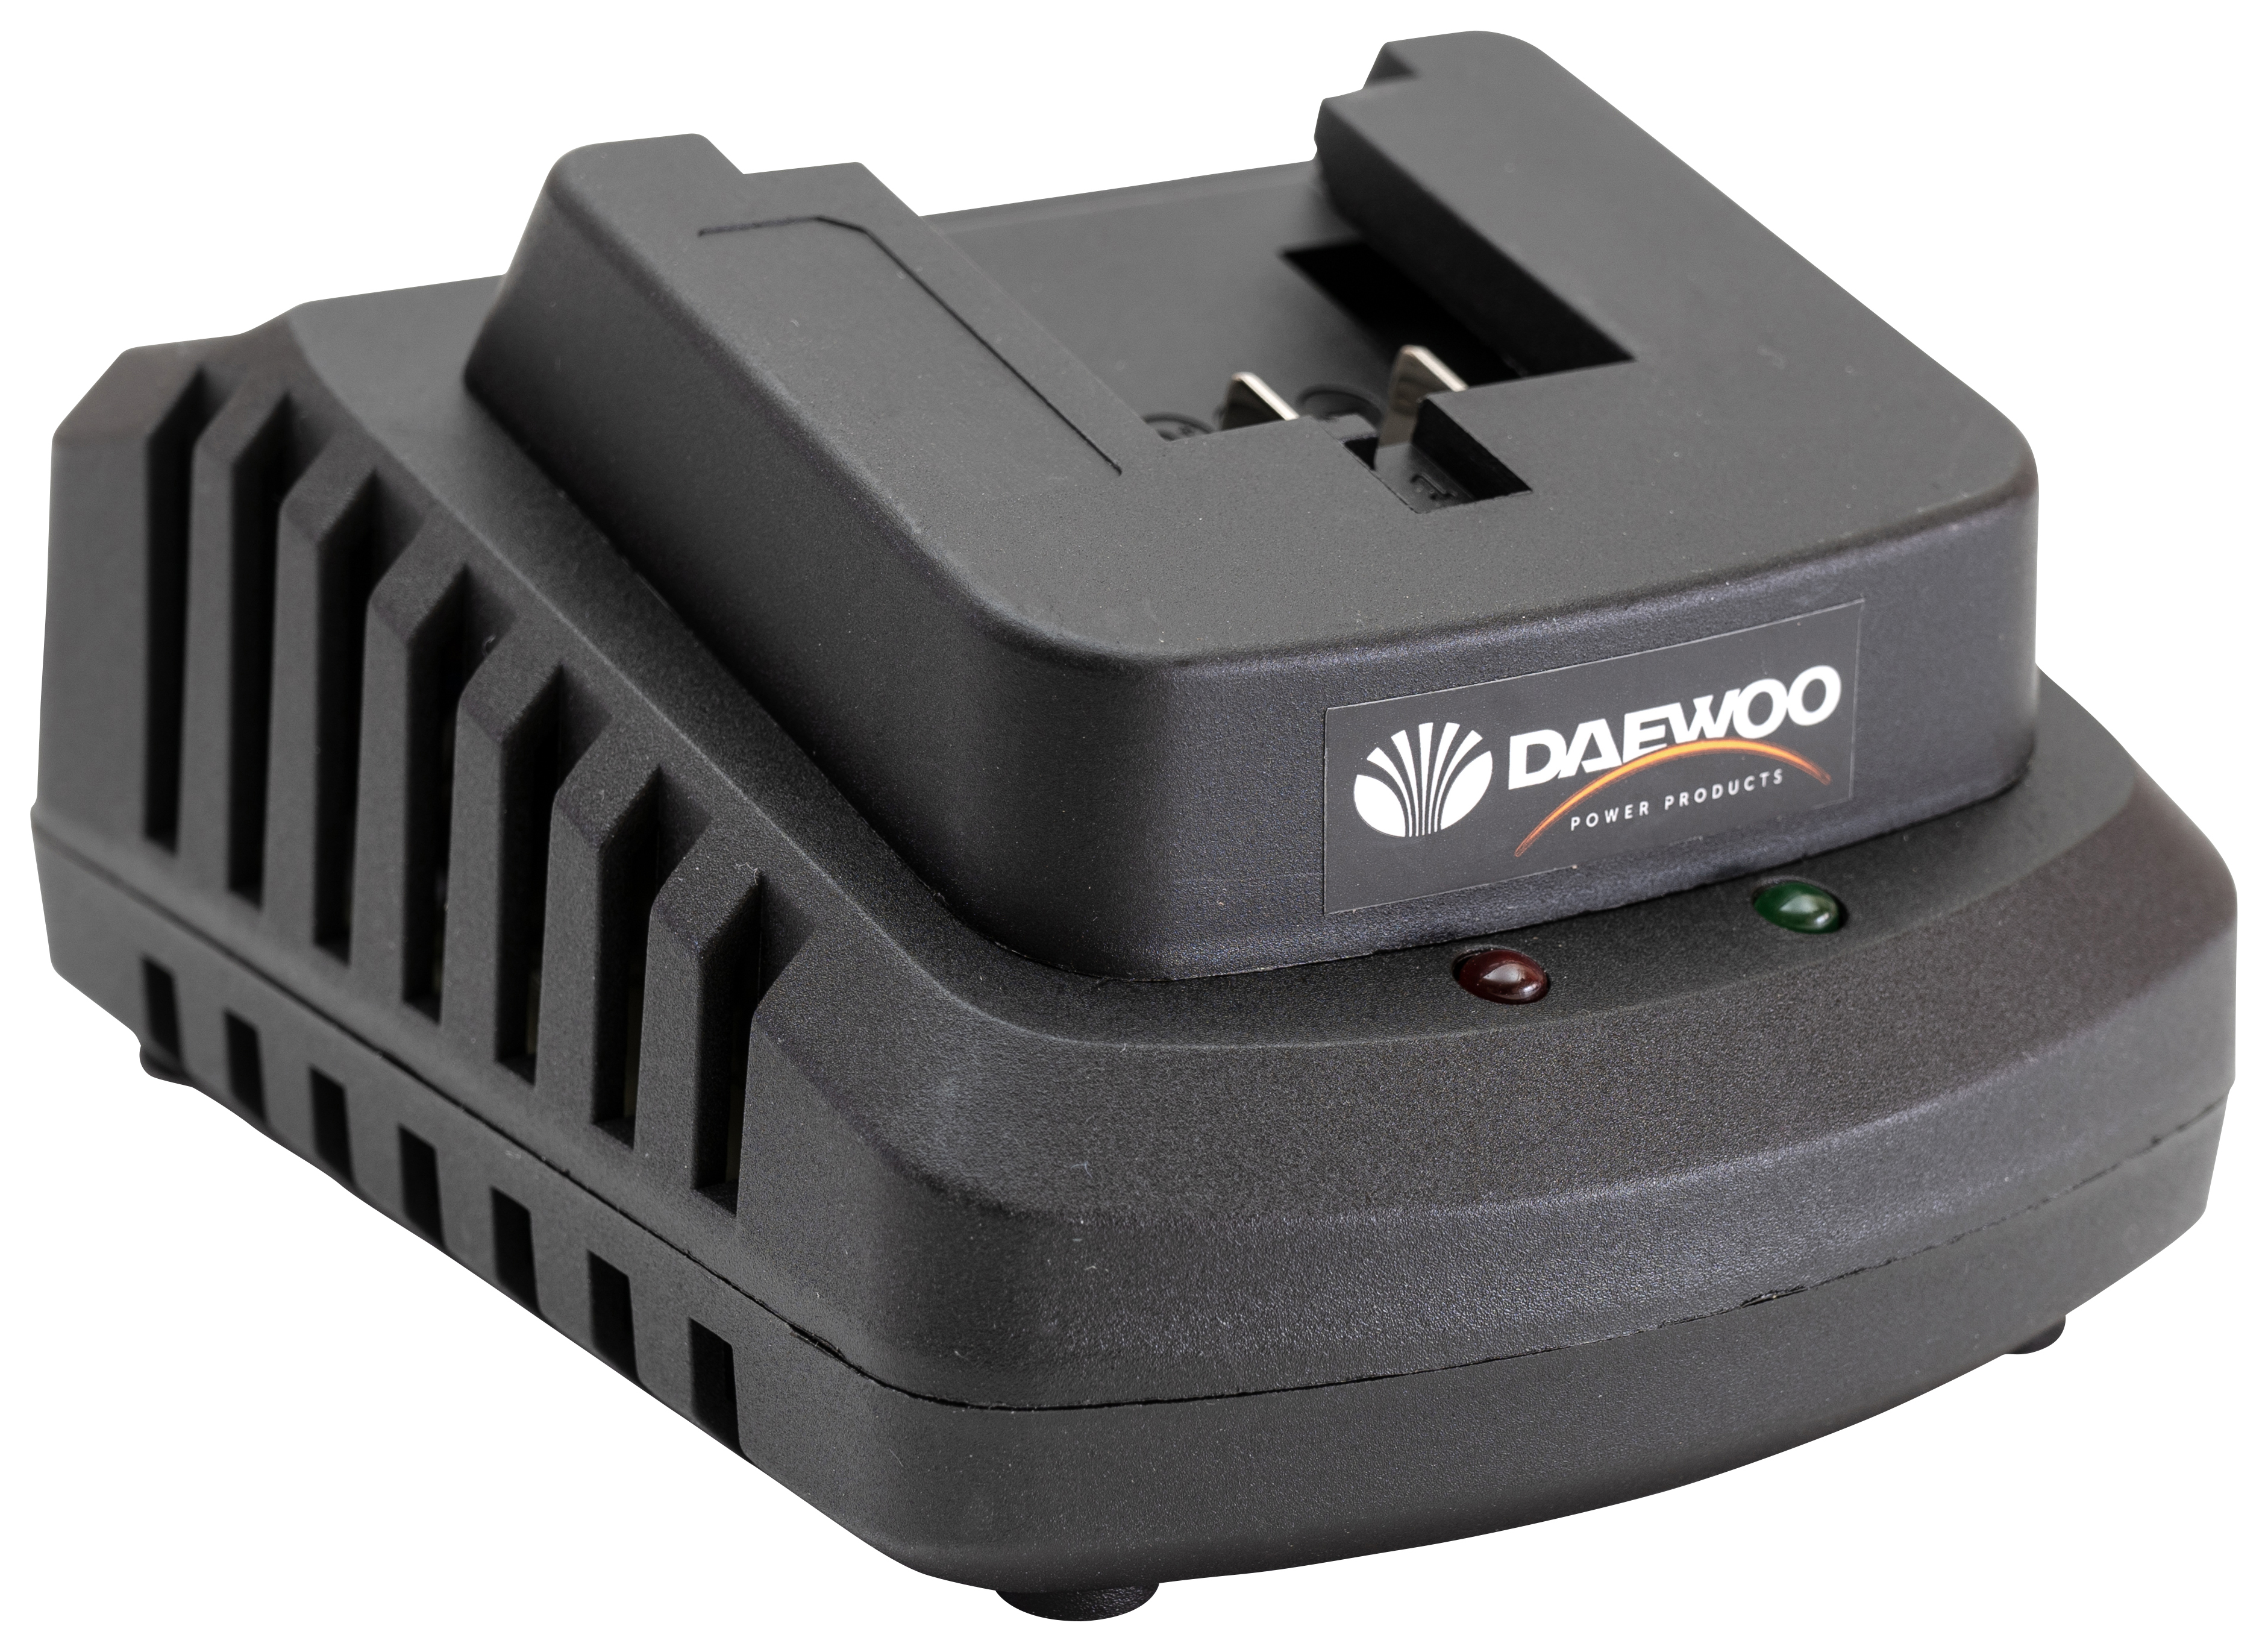 Image of Daewoo 18V Lithium-ion Fast Battery Charger - 2000/4000mAh